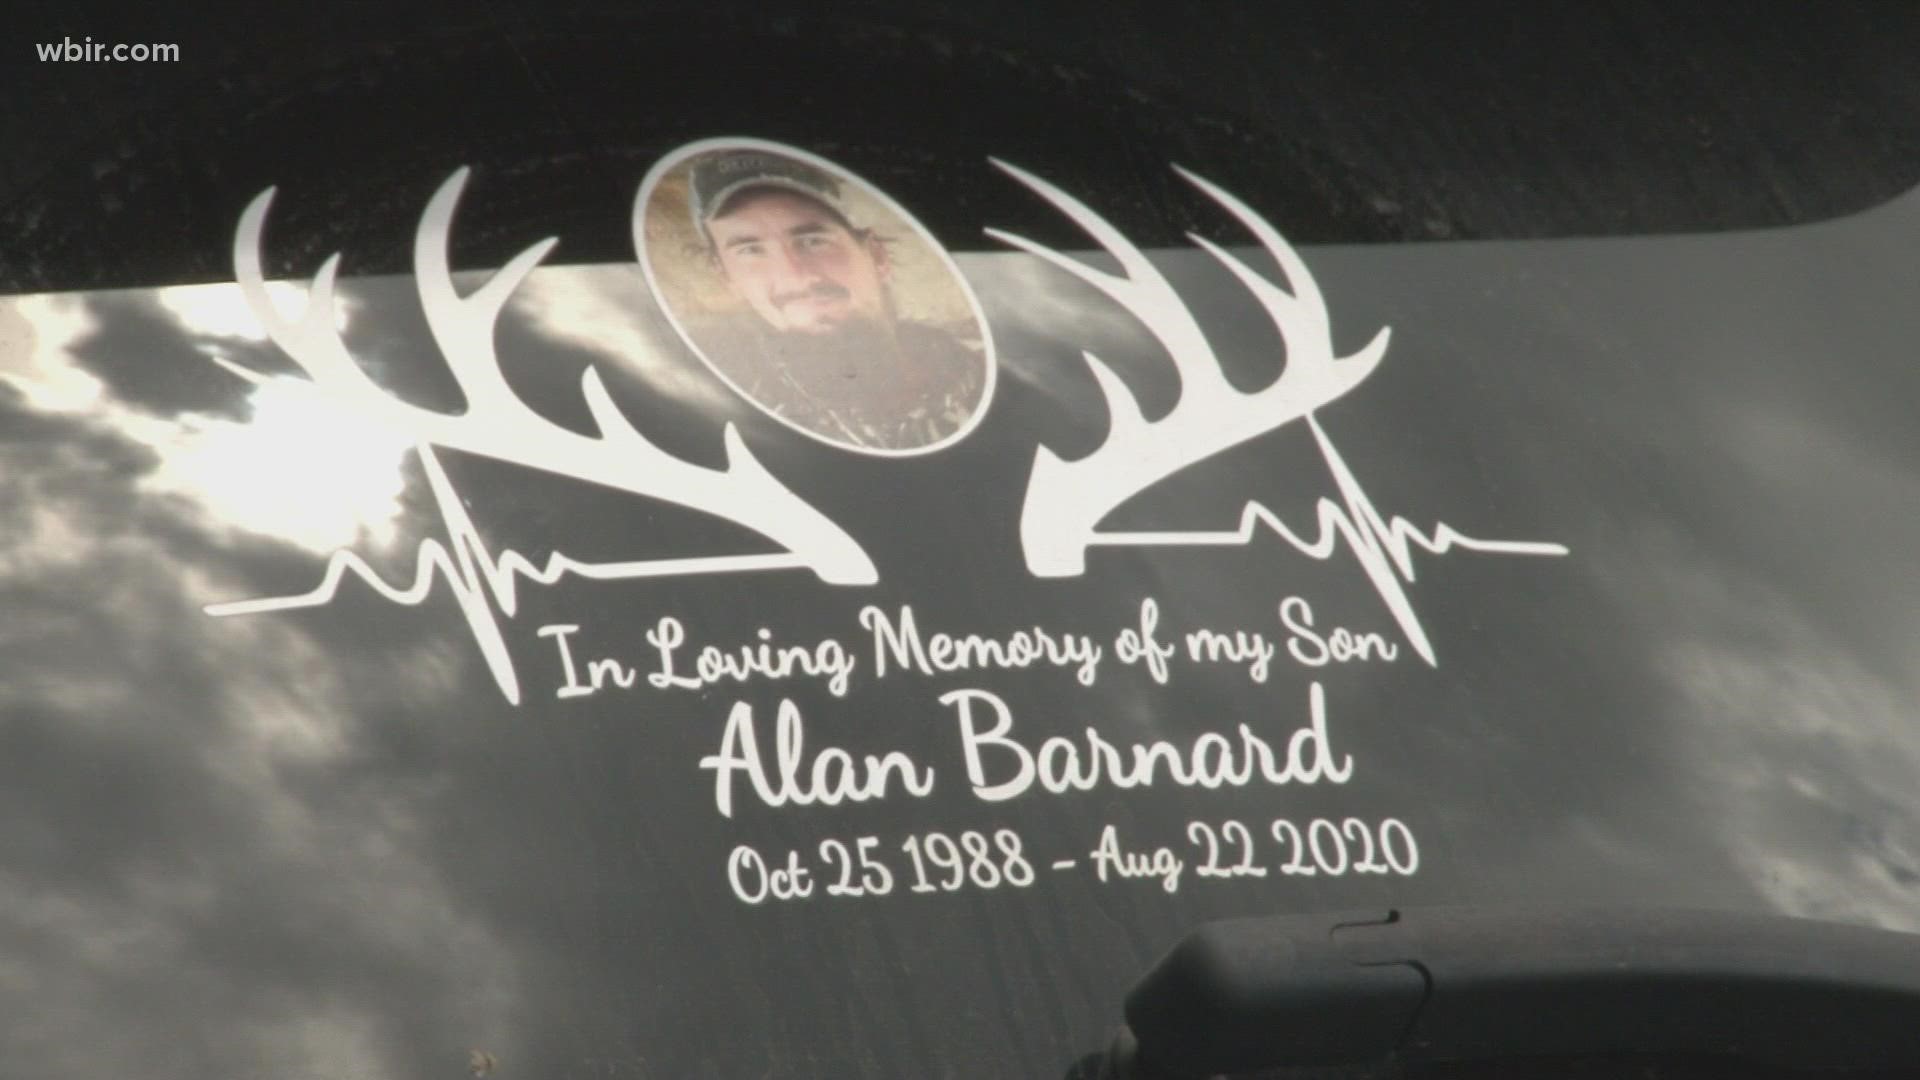 It has been a year since a drunk driver killed 31-year-old Alan Barnard. His family is still heartbroken and is trying to bring more awareness to stop drunk driving